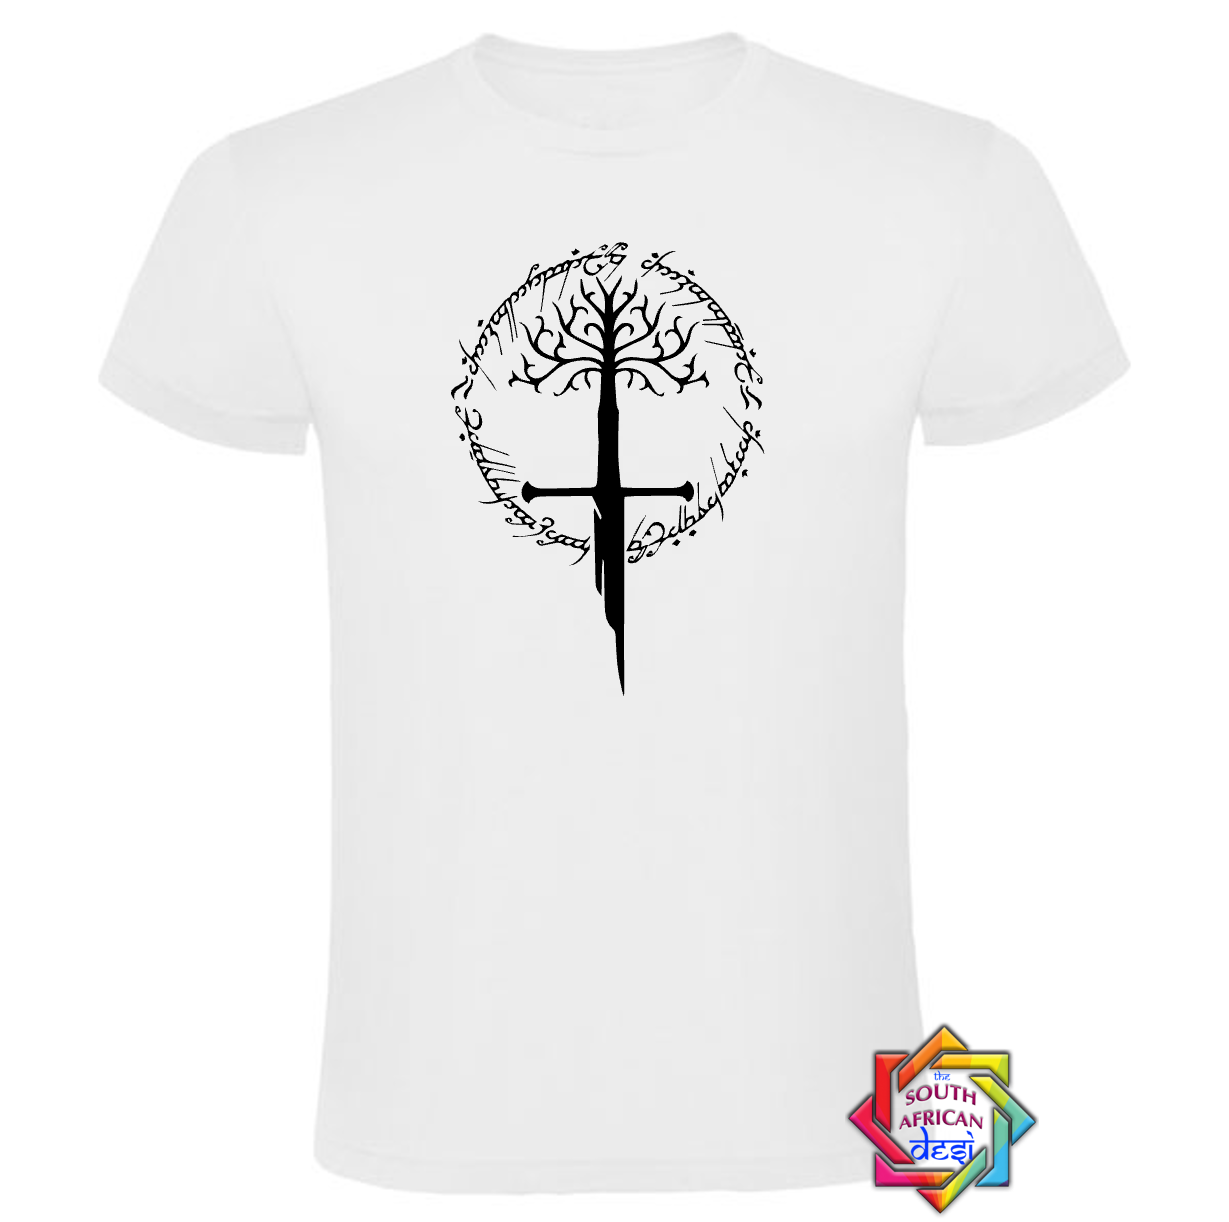 LORD OF THE RINGS INSPIRED T SHIRT